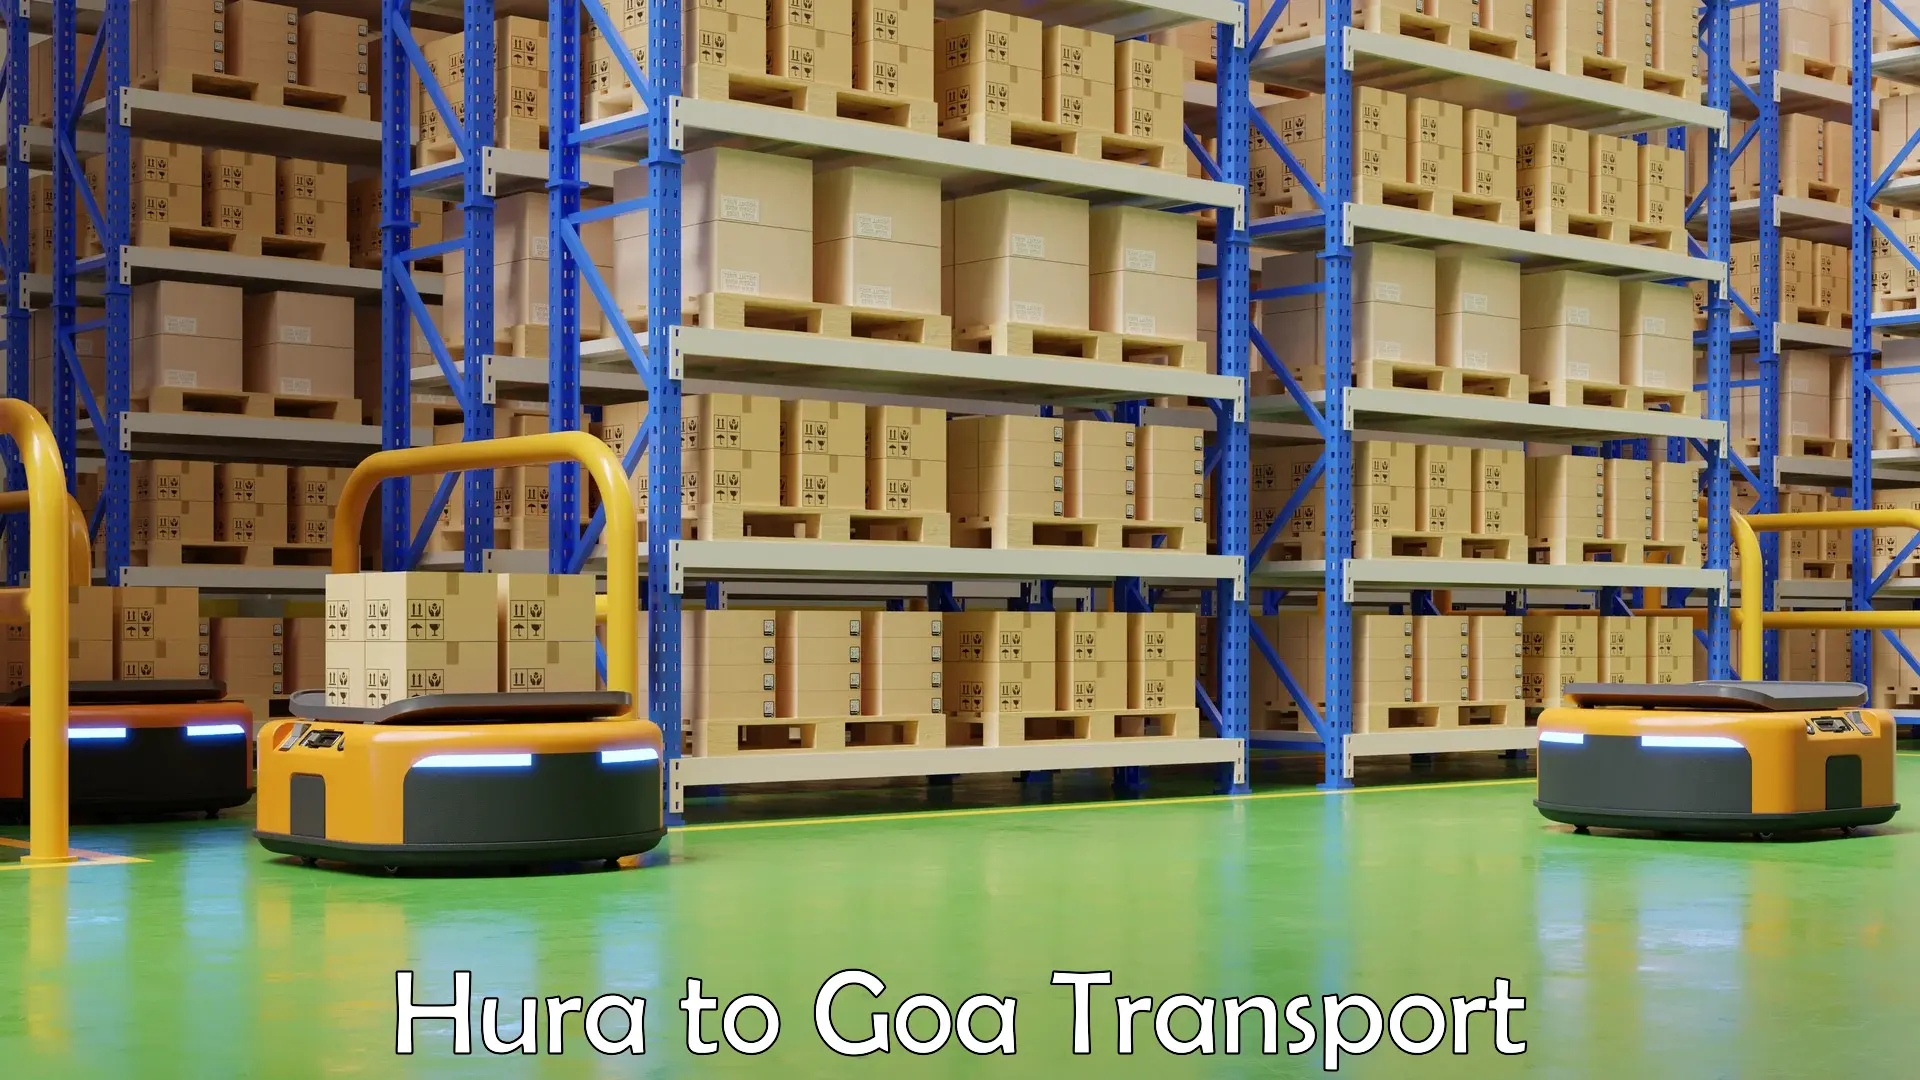 Transport shared services Hura to Goa